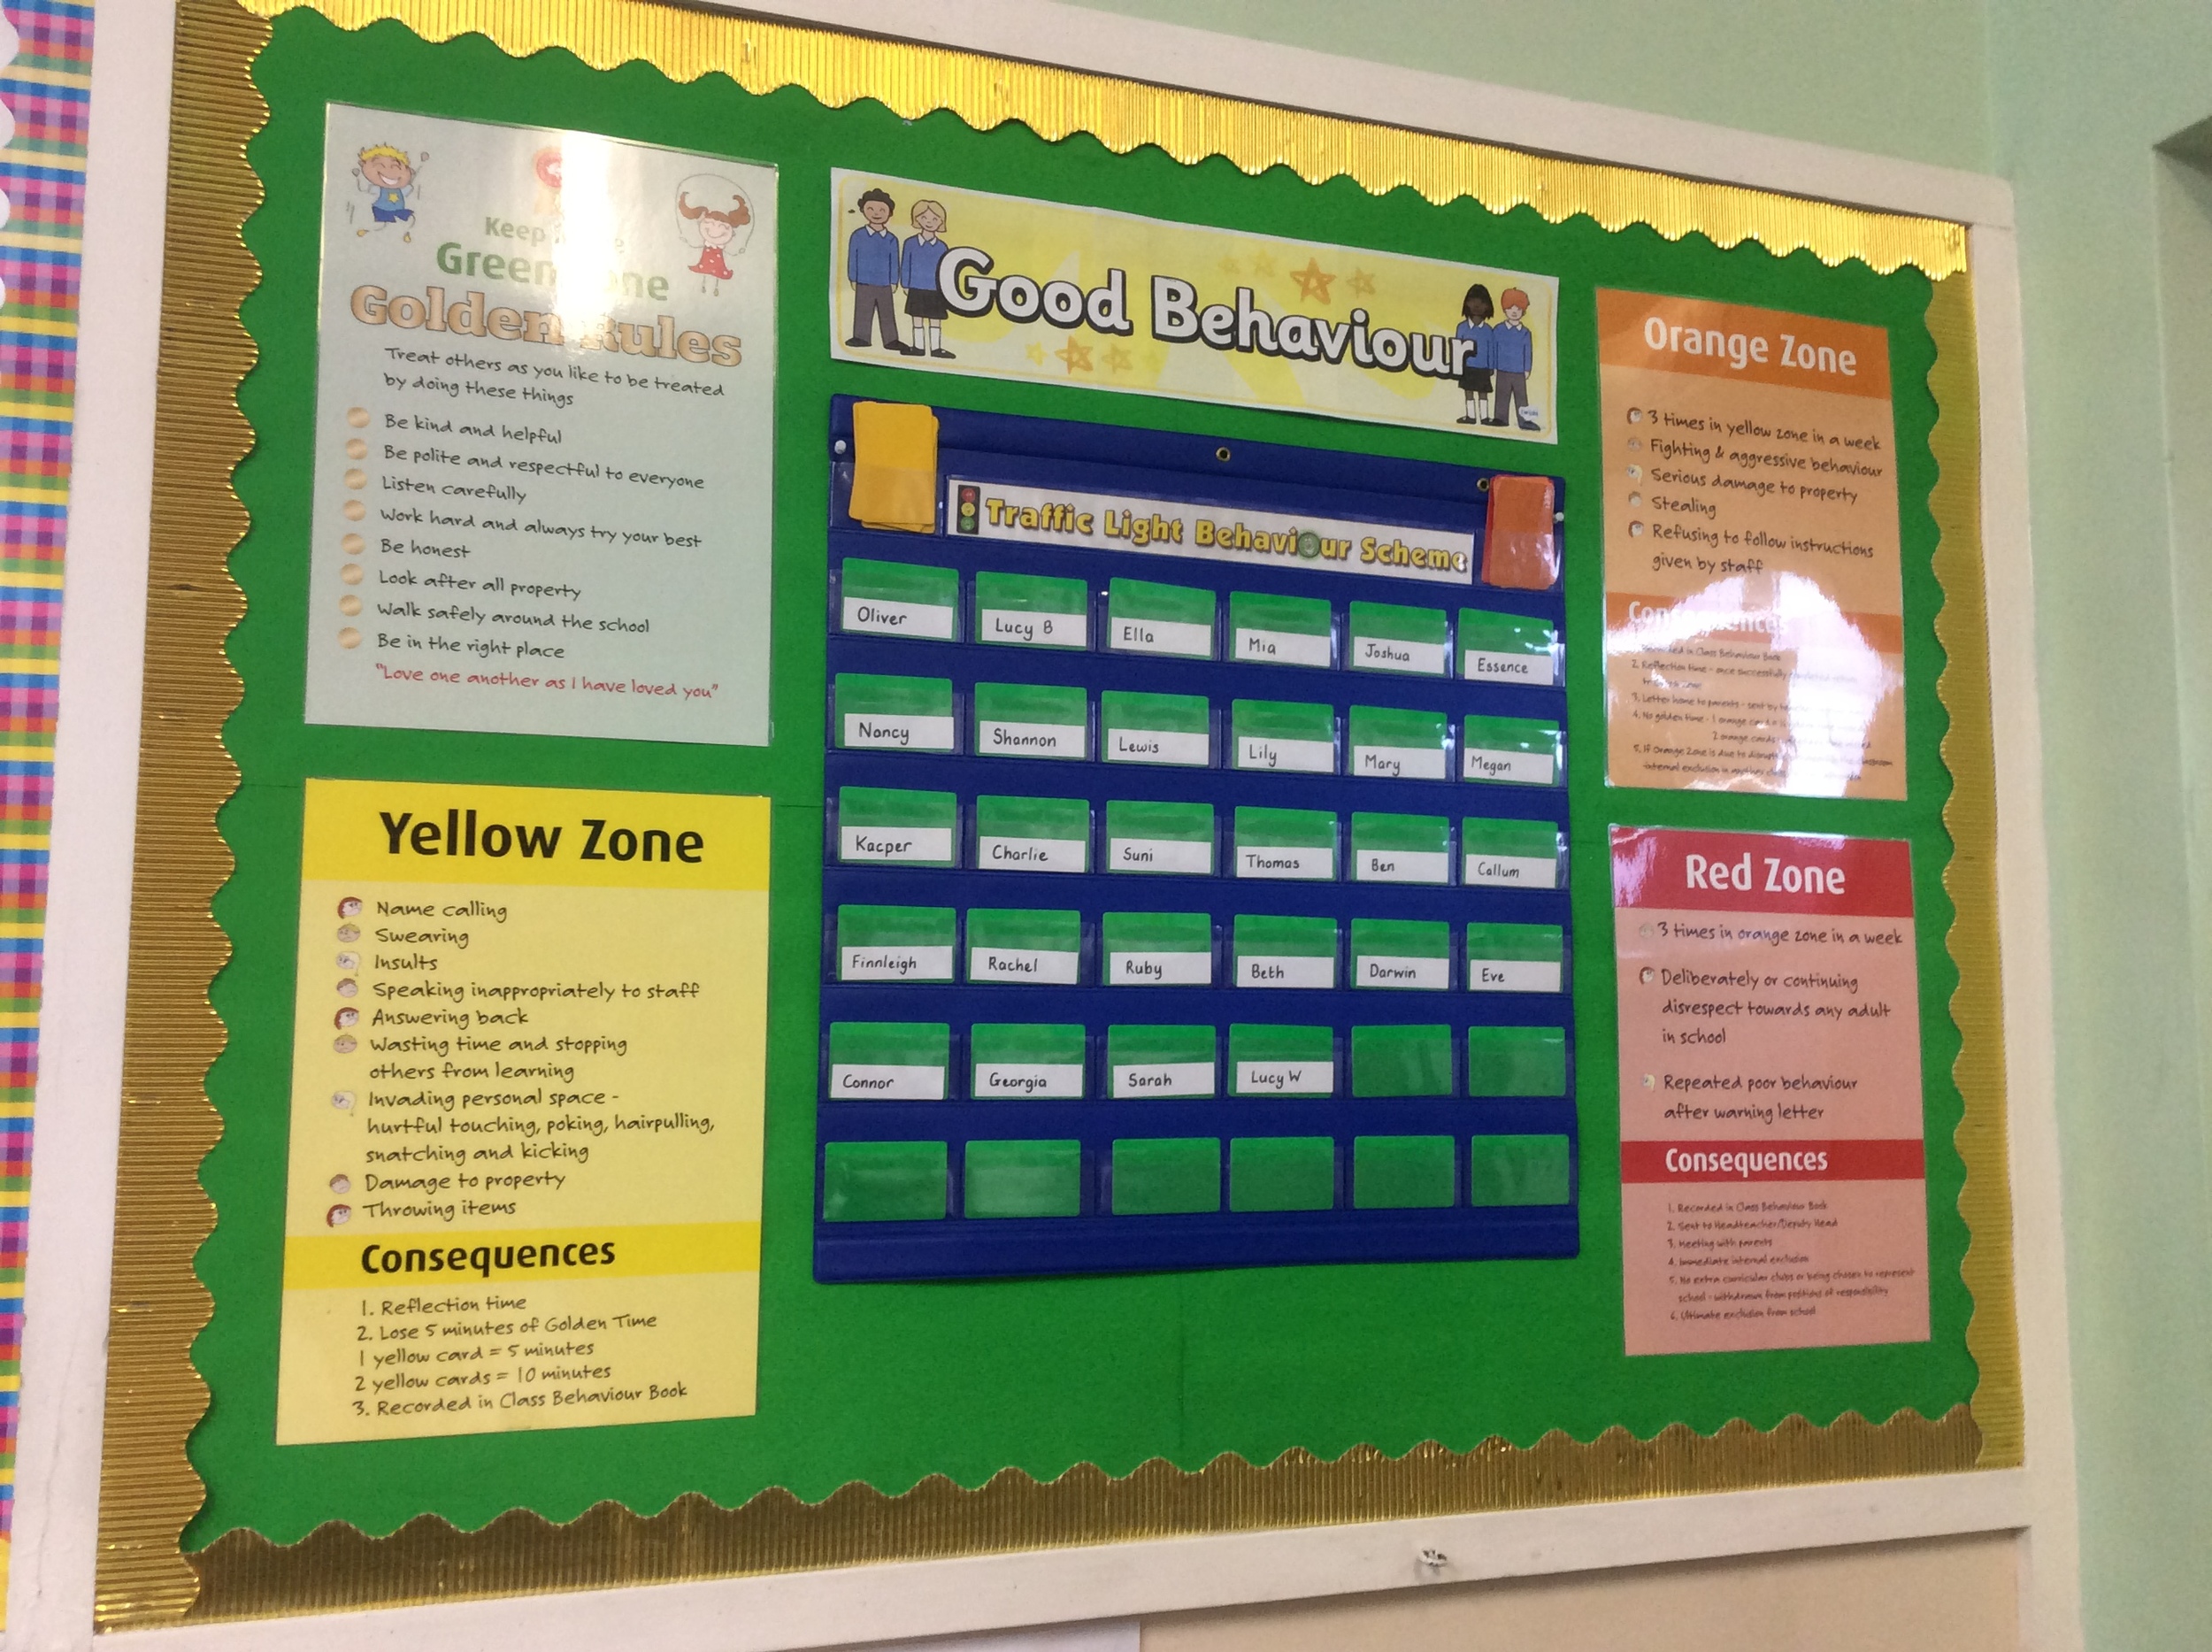  This is our behaviour system. Stay in Green for Golden Time 